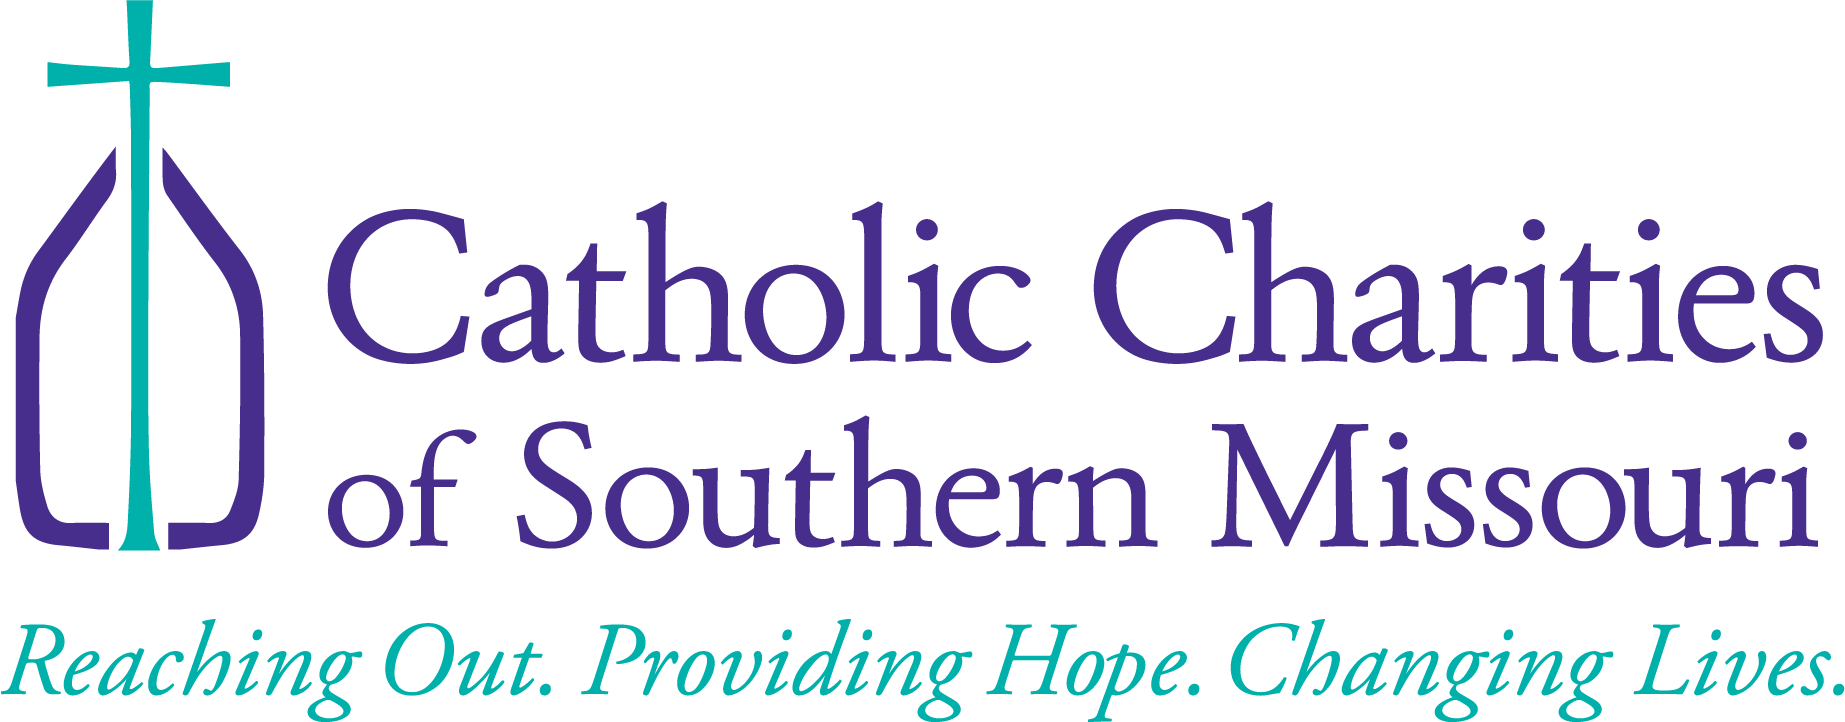 IN THE MEDIA -  CCSOMO leaders to join Catholic Radio Network during pledge drive on KQOH, 91.9 FM, April 20th and 22nd